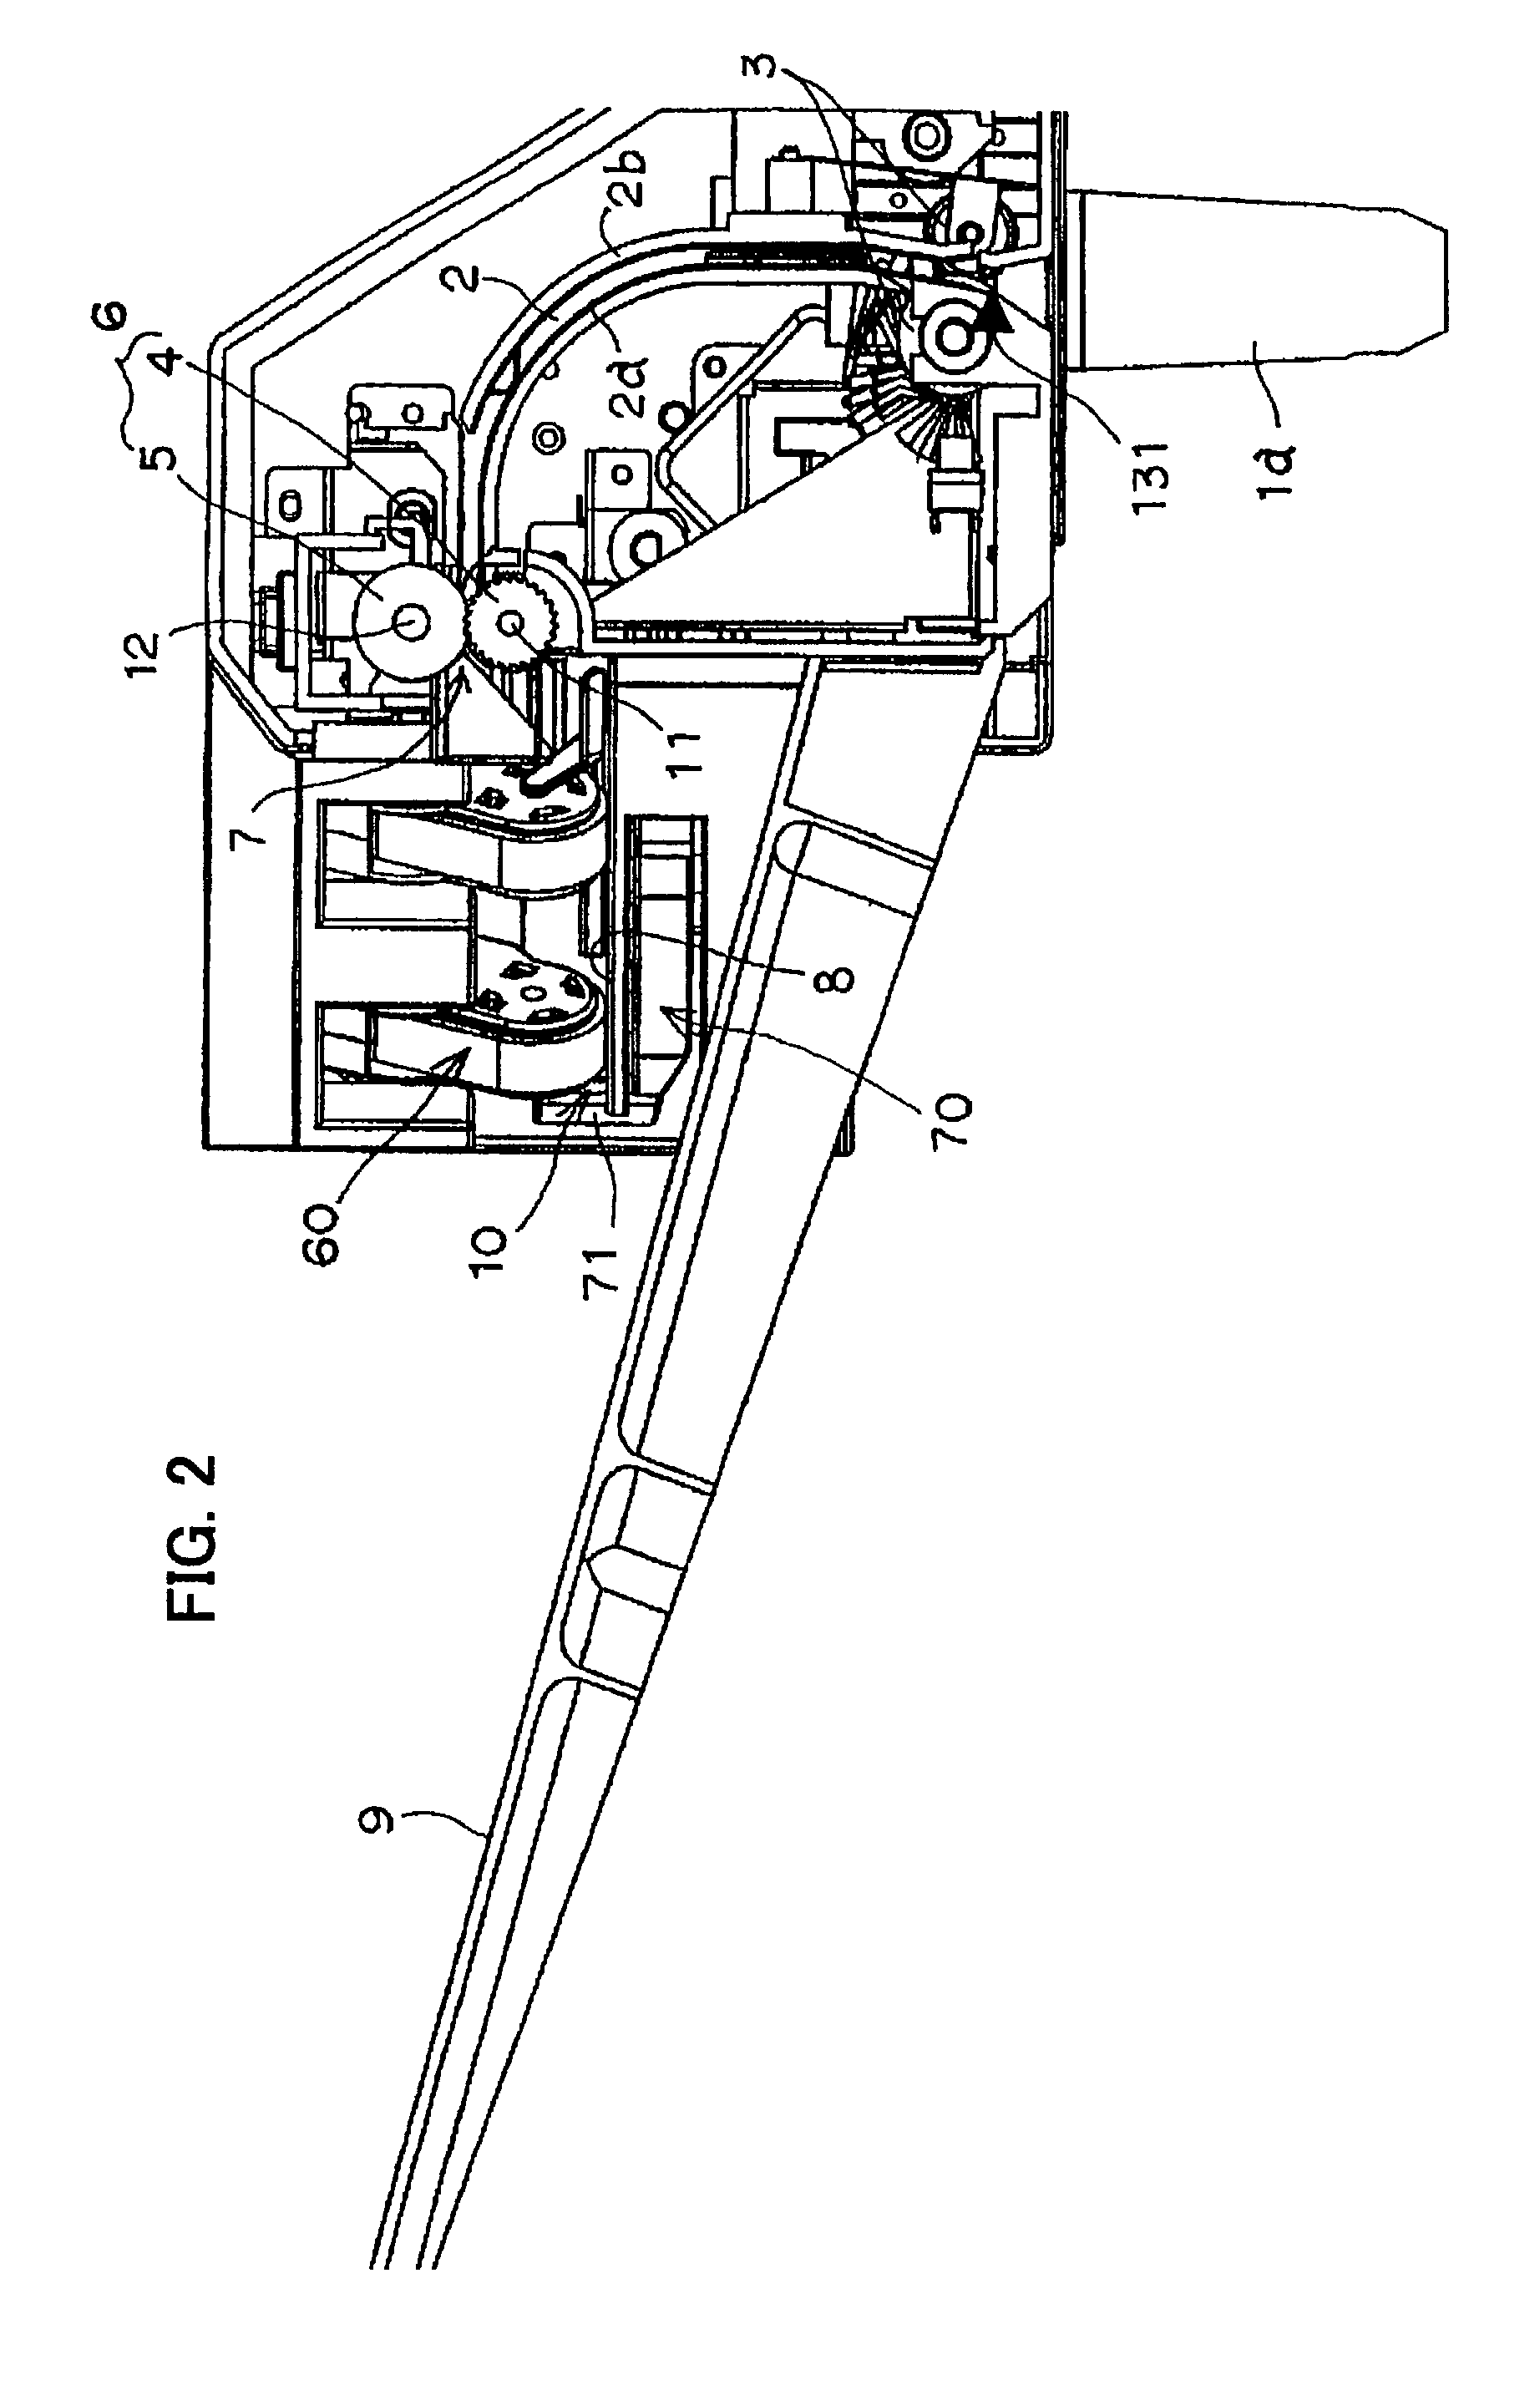 Offsetting discharging apparatus with aligning member